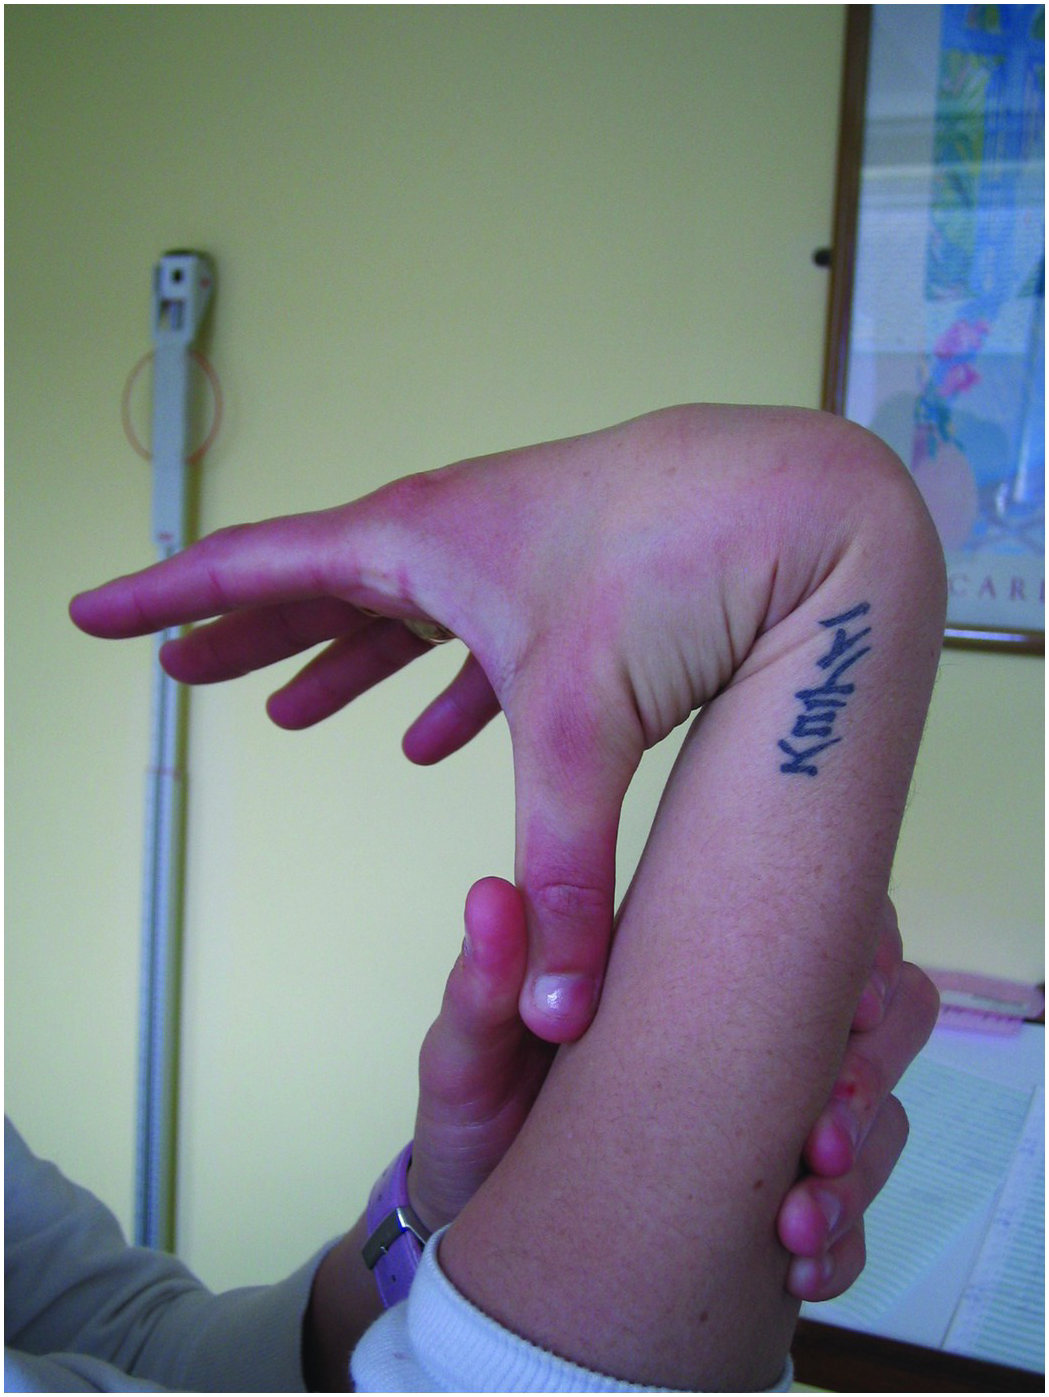 Marfan syndrome hallmarks: claw-shaped hand with long fingers (a